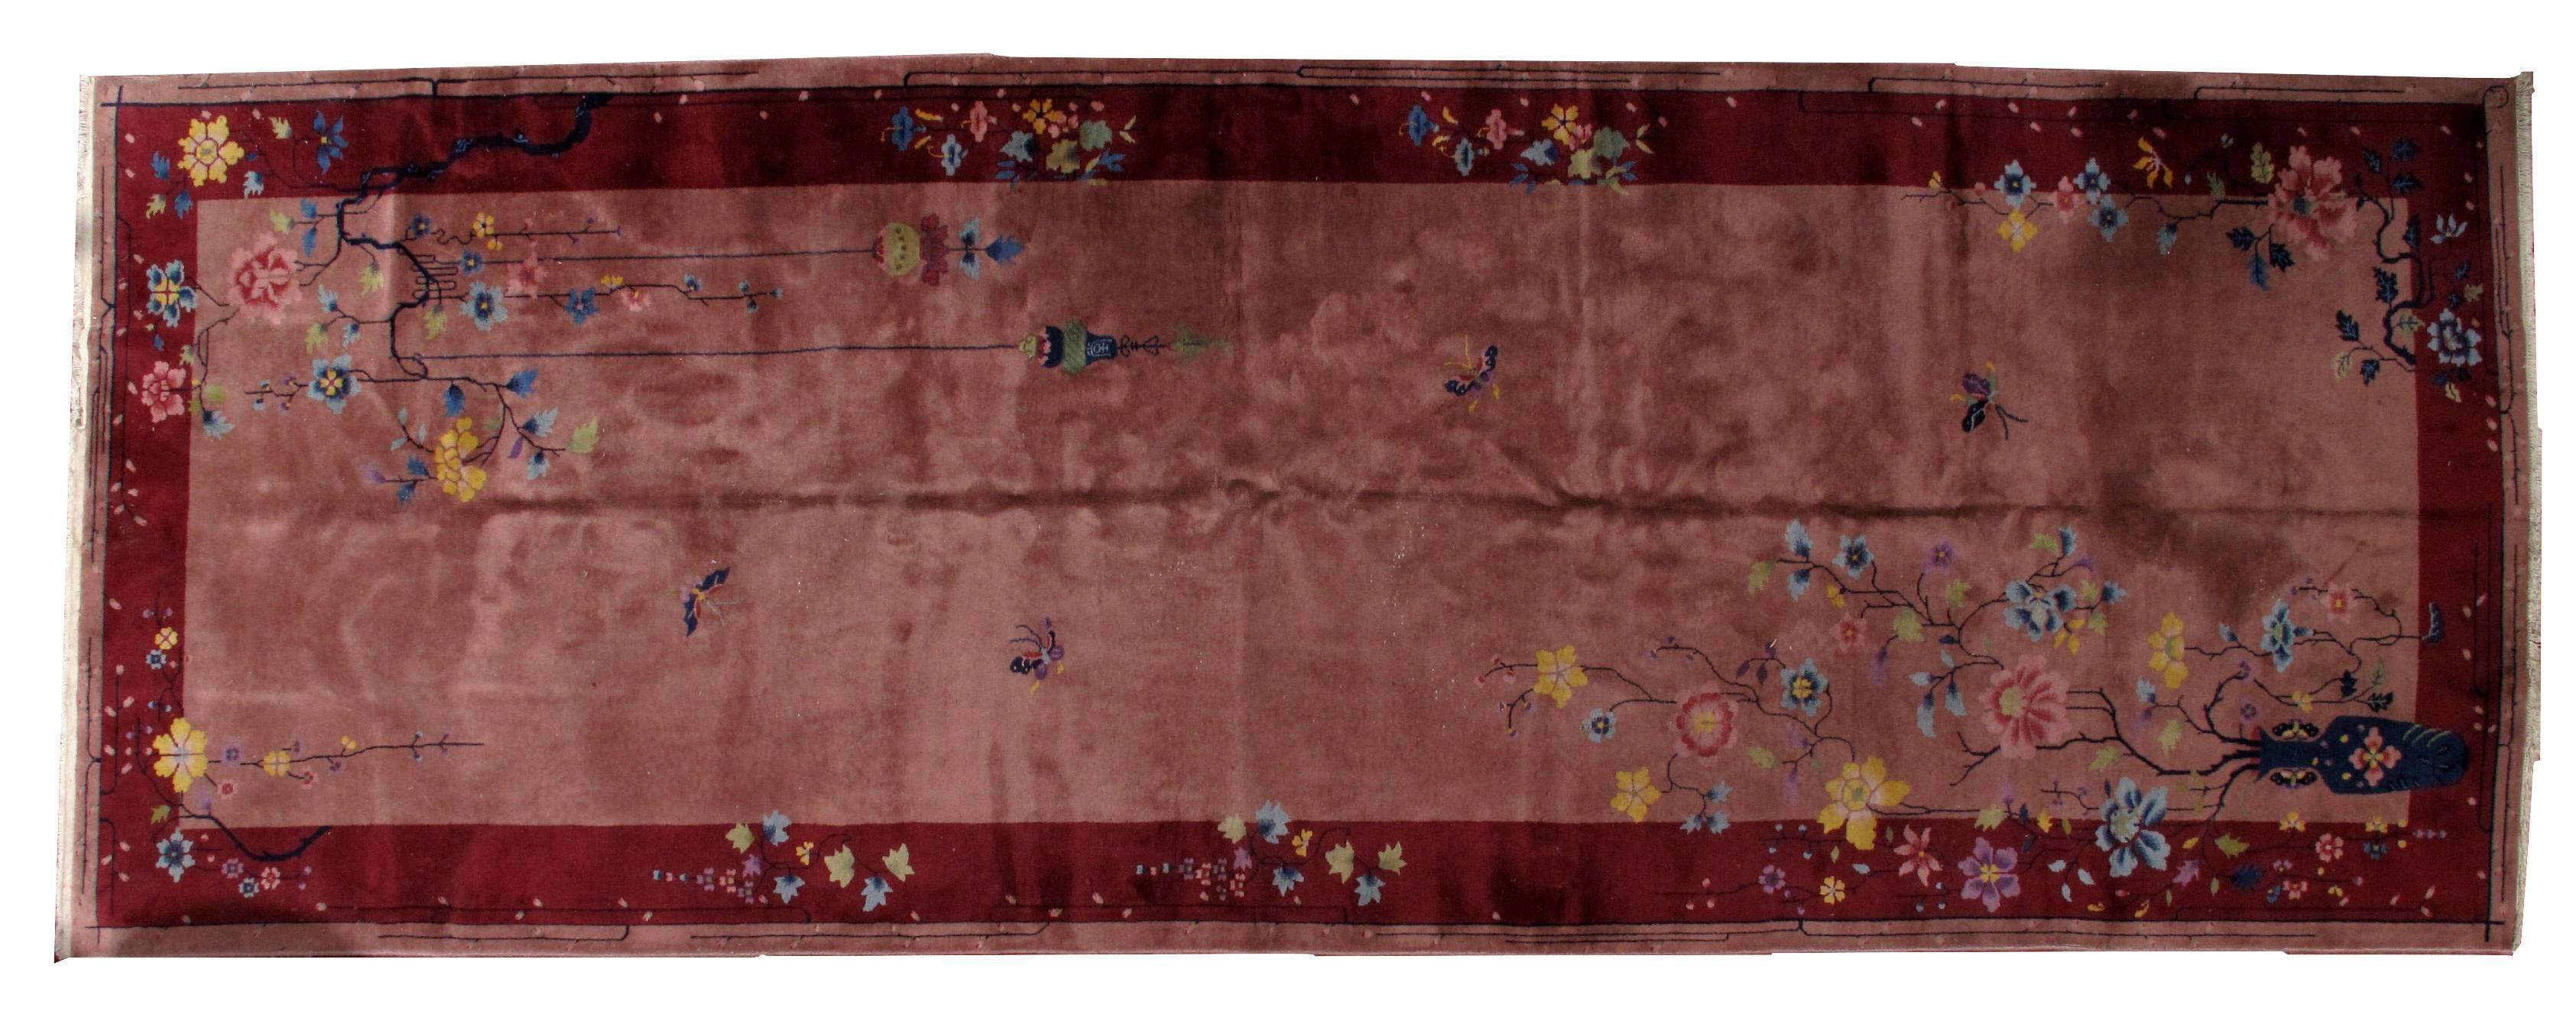 Antique Art Deco Chinese rug in original condition. The rug is in burgundy color with darker burgundy border. It is decorated with classical Art Deco style: vase, branches with the flowers and leaves. The colors on this rug are combined very well